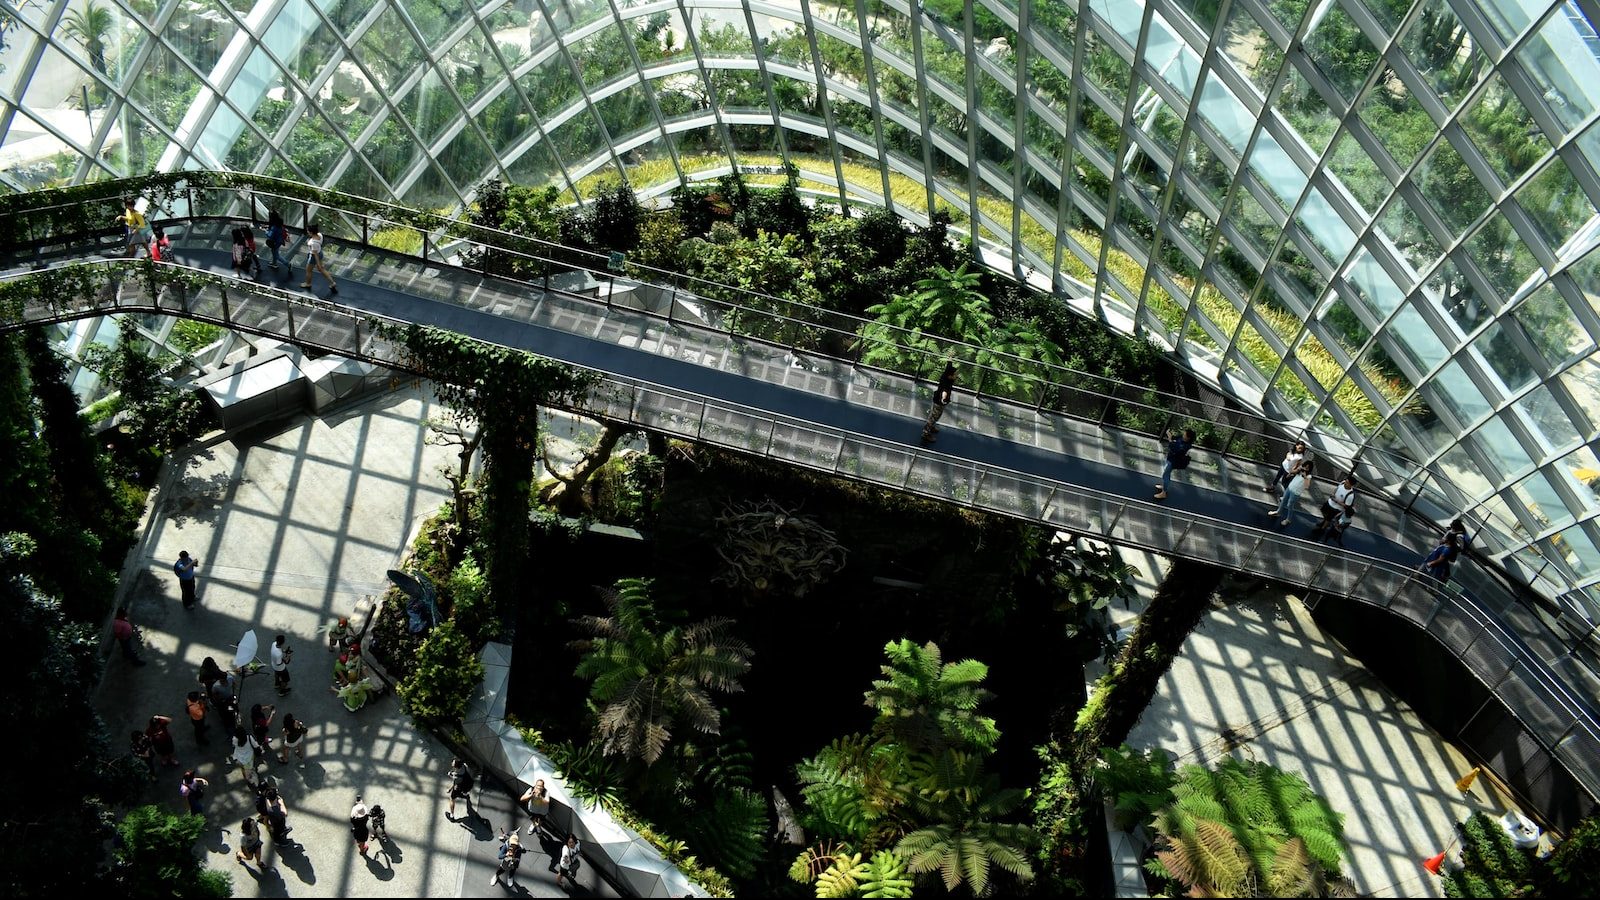 sustainable business practices like green architecture reimagine urban spaces to create indoor greenhouses